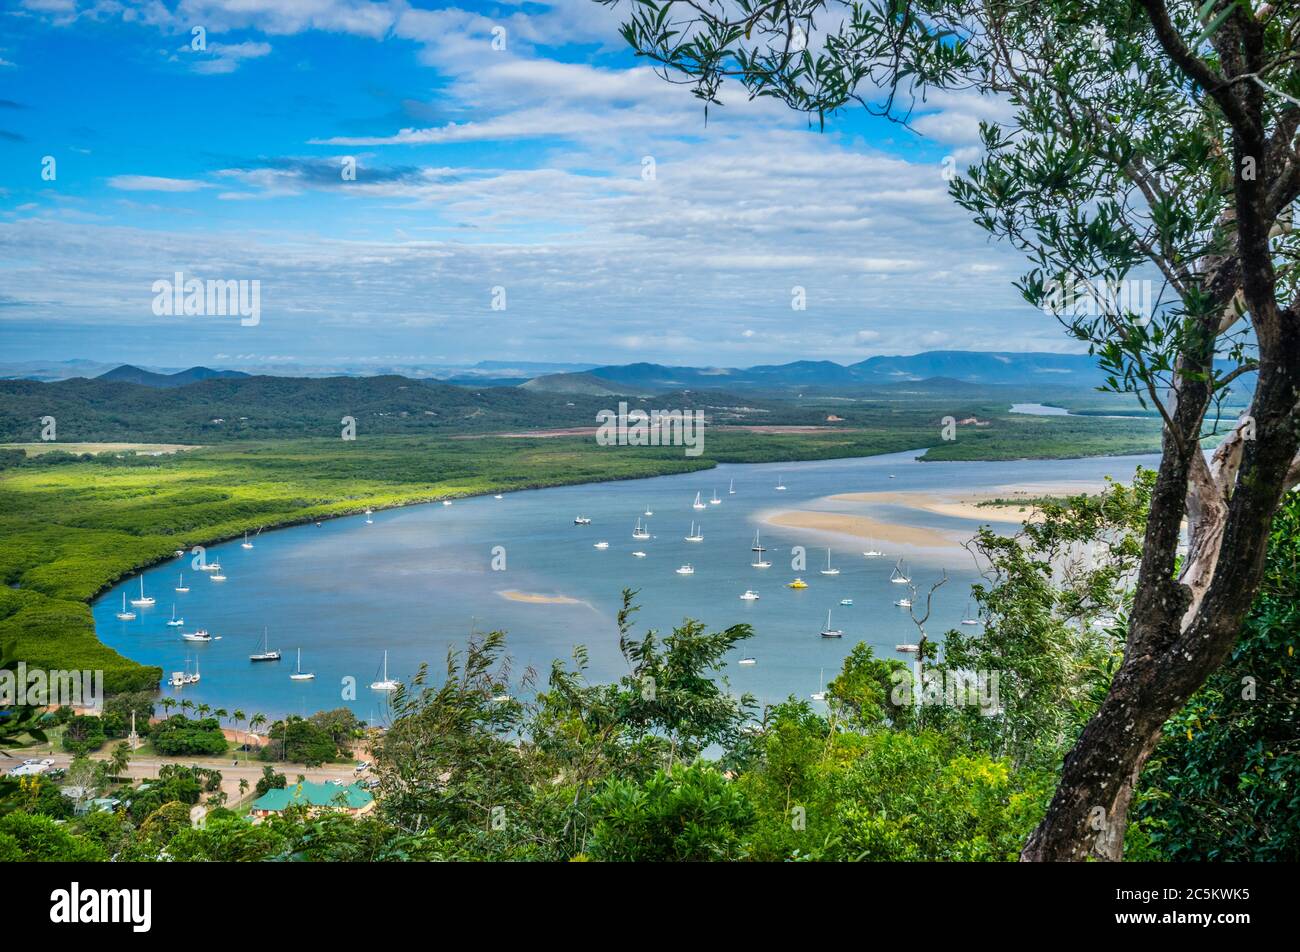 view of Cooktown and the Endeavour River from Cook's Lookout on Grassy Hill, Cooktown, Cape York Penunsula, Far North Queensland, Australia Stock Photo